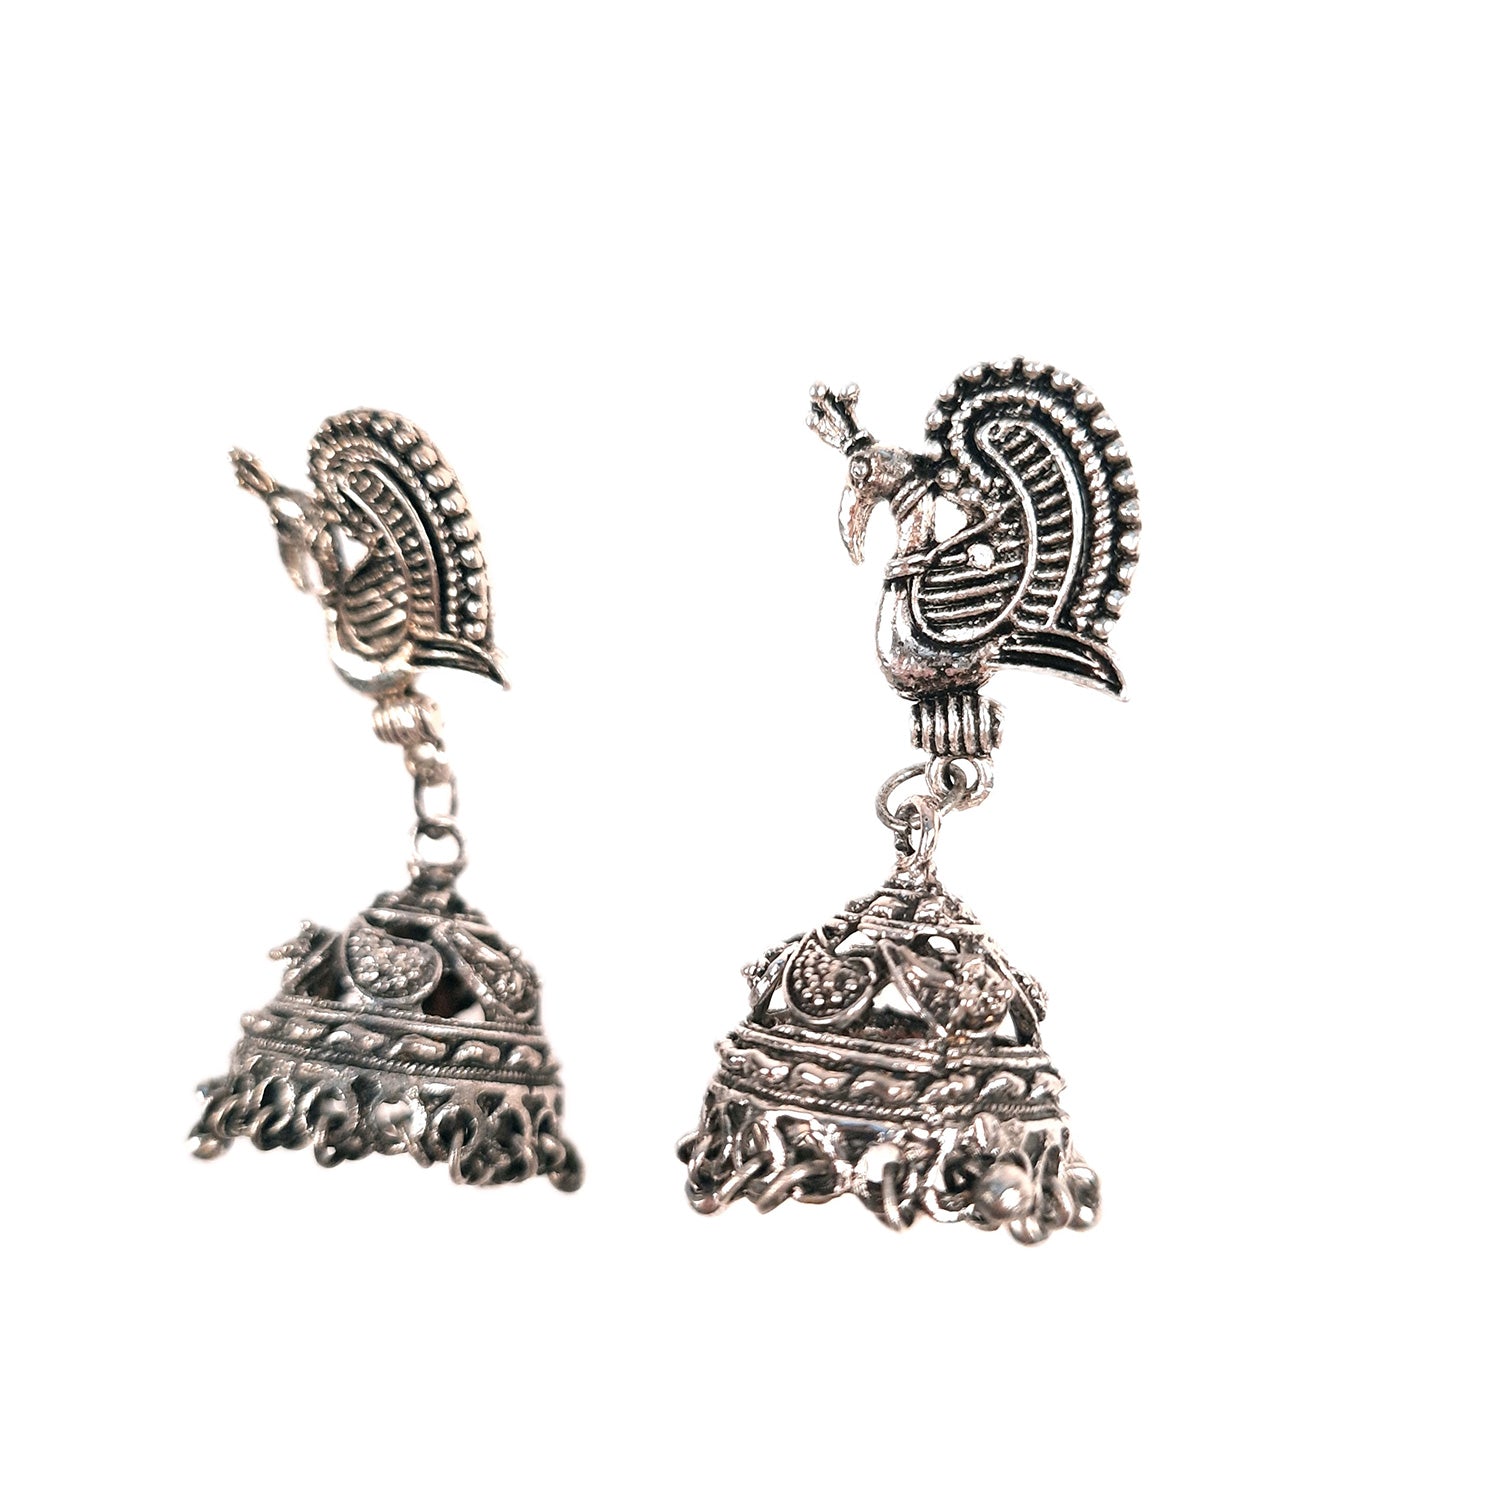 Jhumka Earrings Oxidised Silver Plated for Girls and Women - Peacock Design | Traditional Jewellery | Gifts for Her, Friendship Day, Valentine's Day Gift - Apkamart